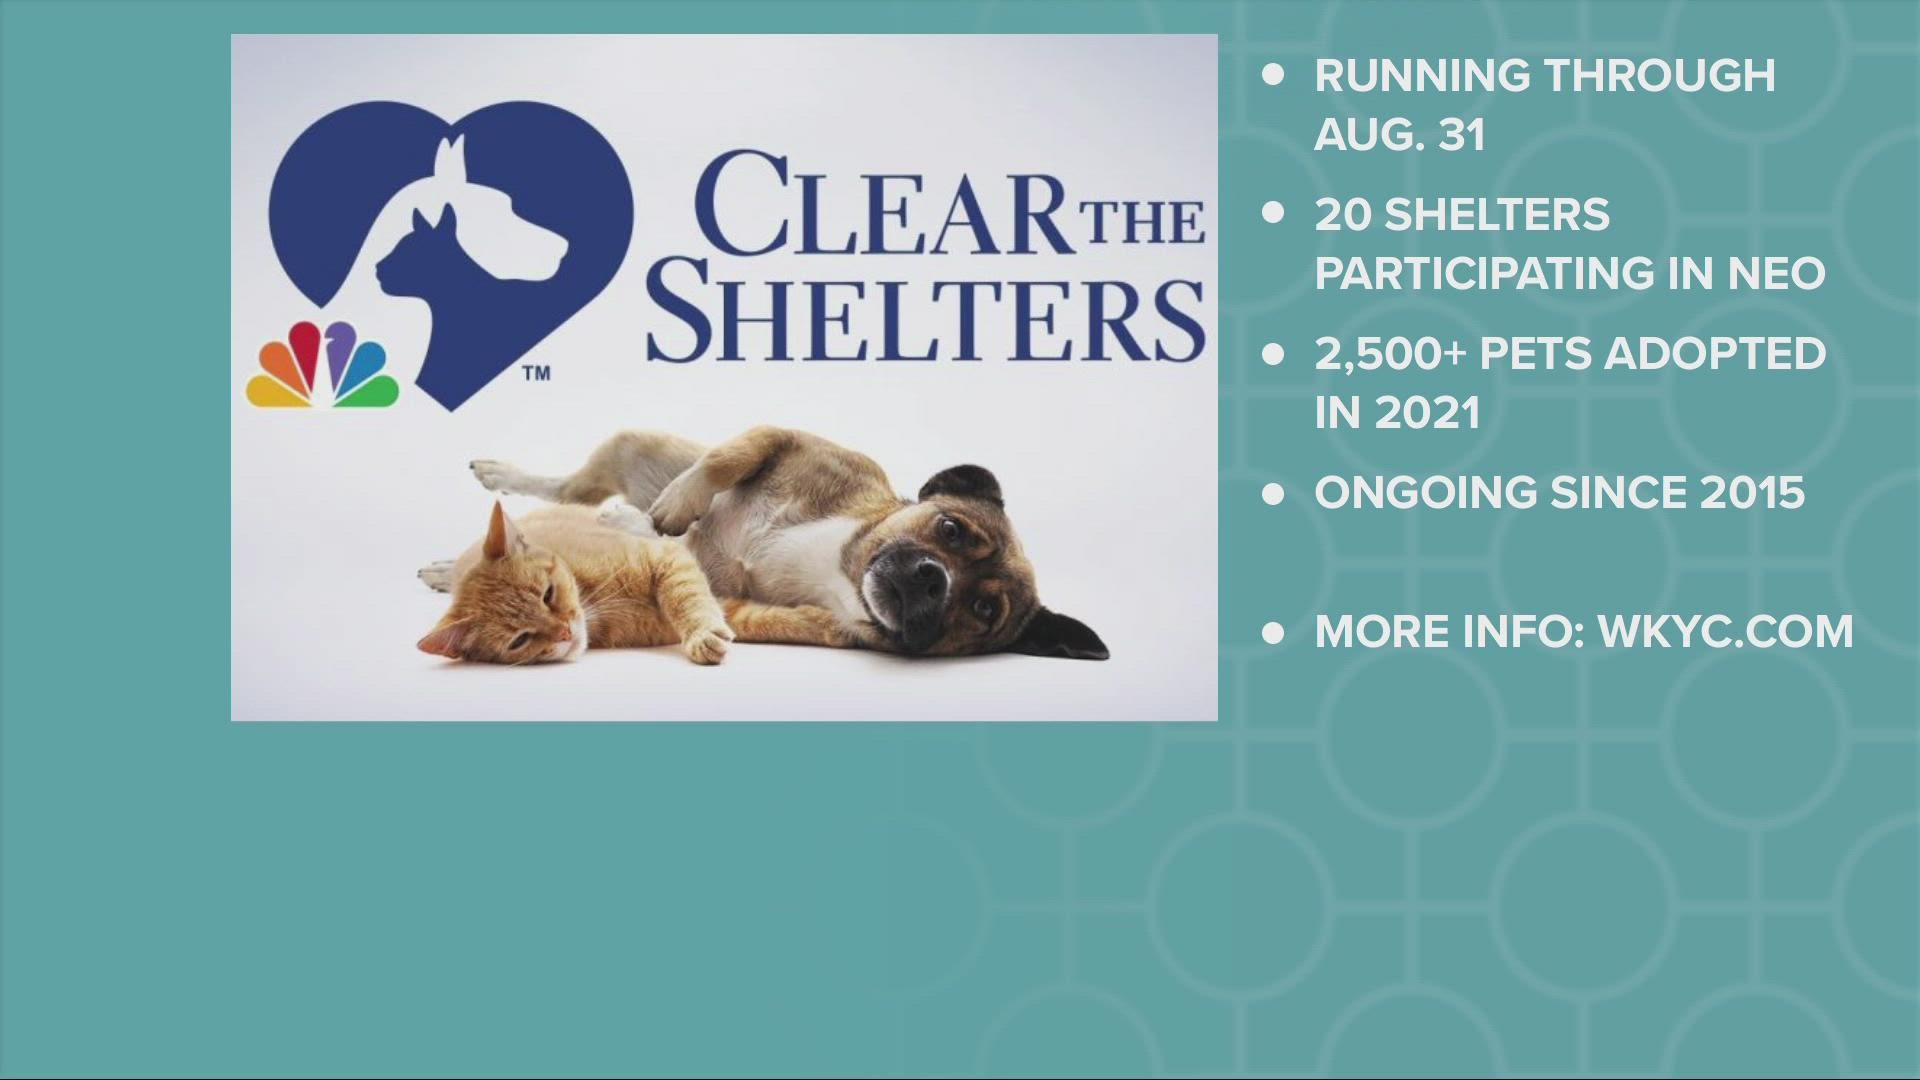 How to adopt a pet in Northeast Ohio during Clear the Shelters? 